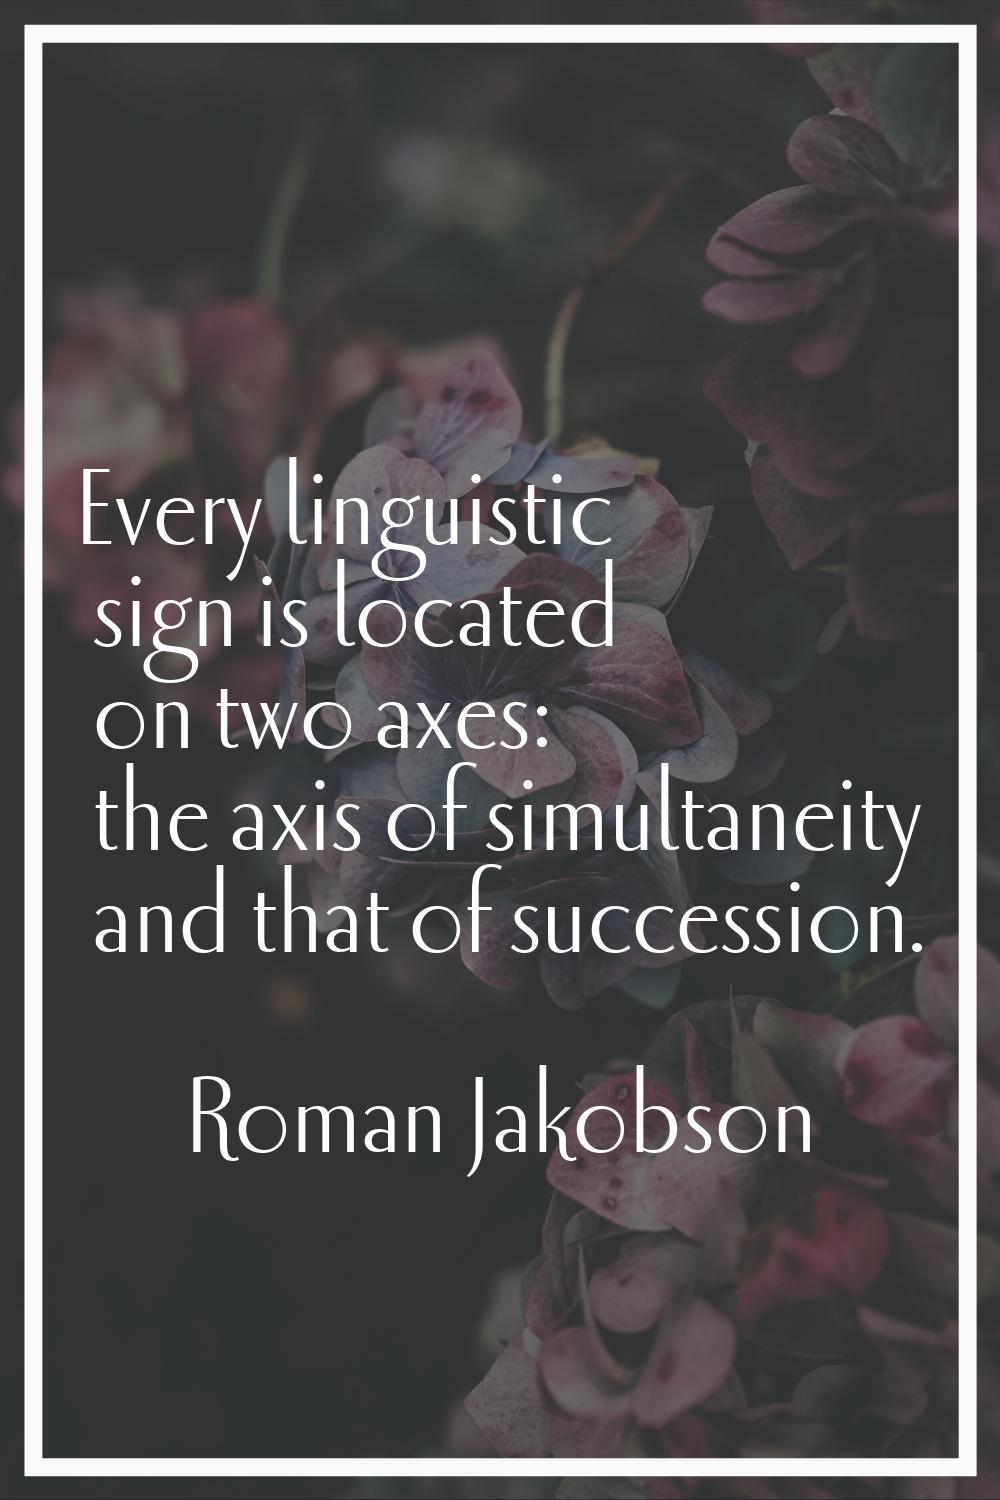 Every linguistic sign is located on two axes: the axis of simultaneity and that of succession.